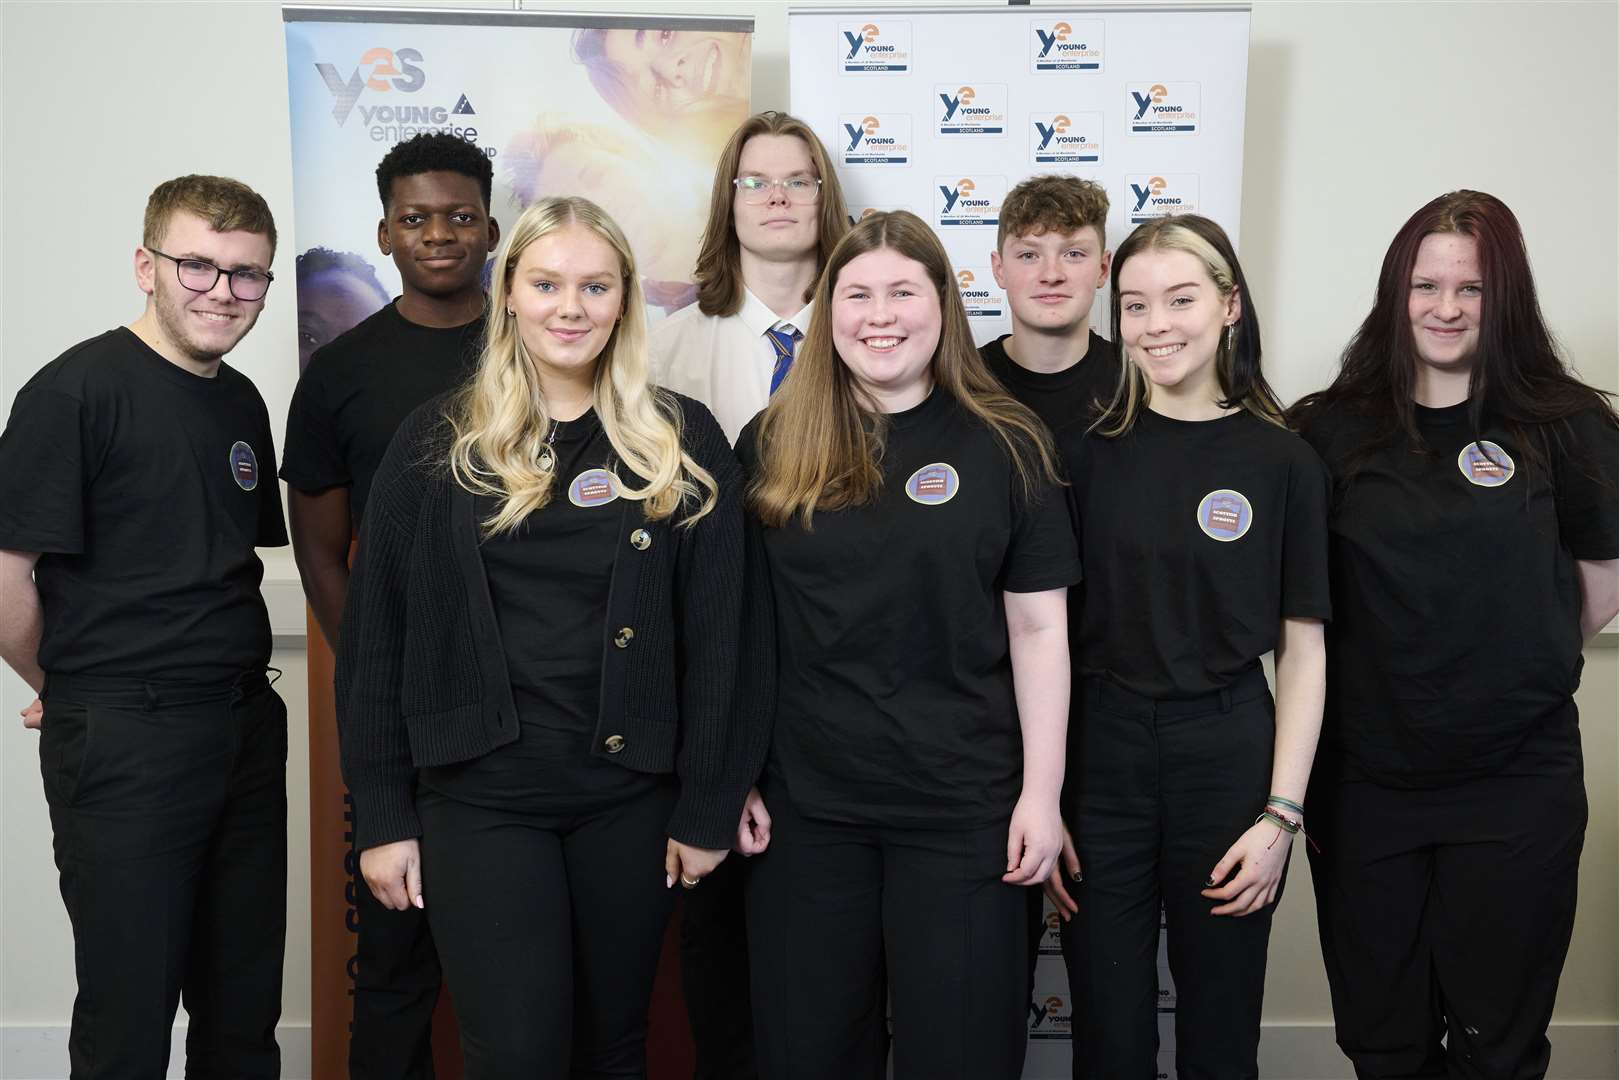 Inverness Royal Academy. Back from left: Ryan Fleming, Valentine Jude-Eze, Aidan Oliver, Lucas Adamiec. Front from left: Sadie Traill, Mollie MacBride, Millie Young, Holly McPherson.